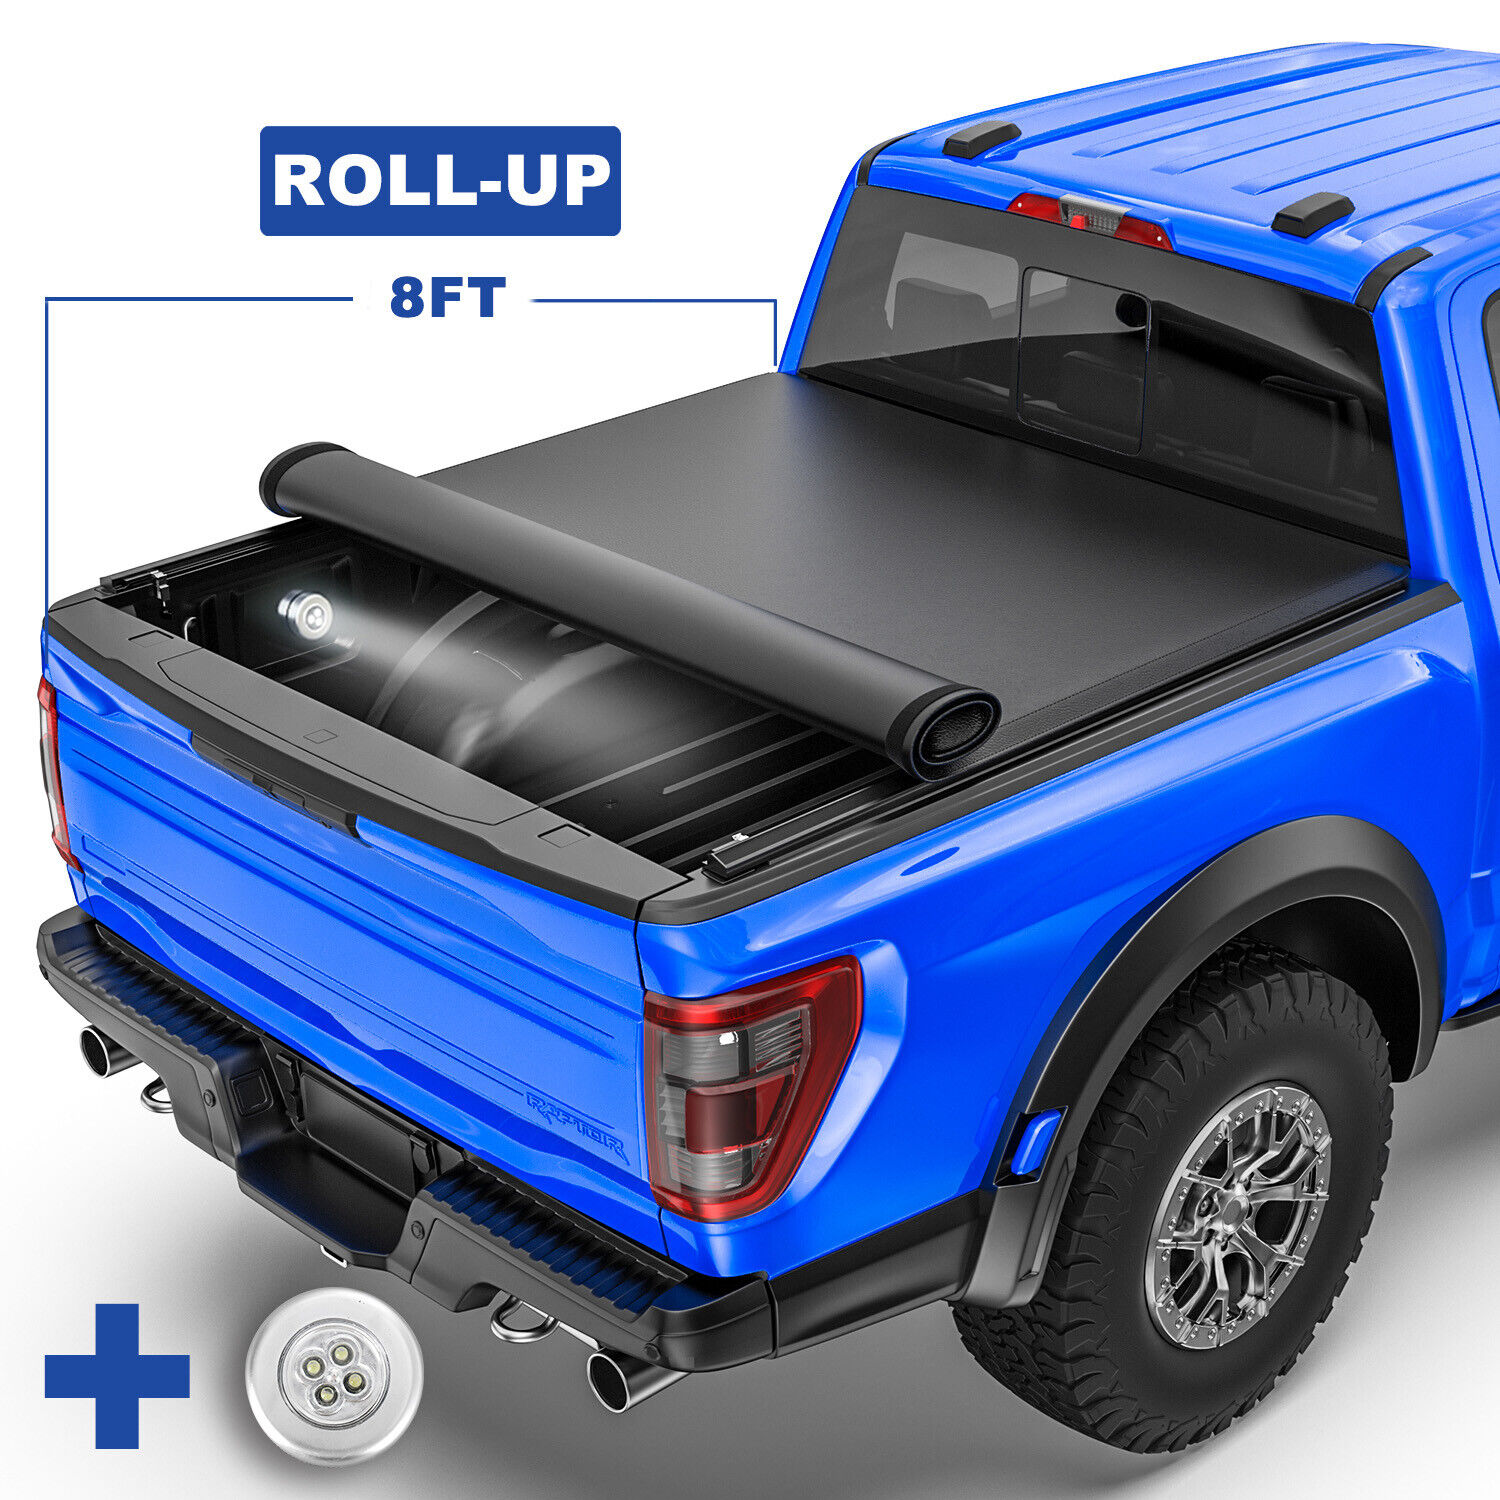 8FT Roll Up Truck Tonneau Cover Soft For 2007-2013 Toyota Tundra Long Bed 97.6\'